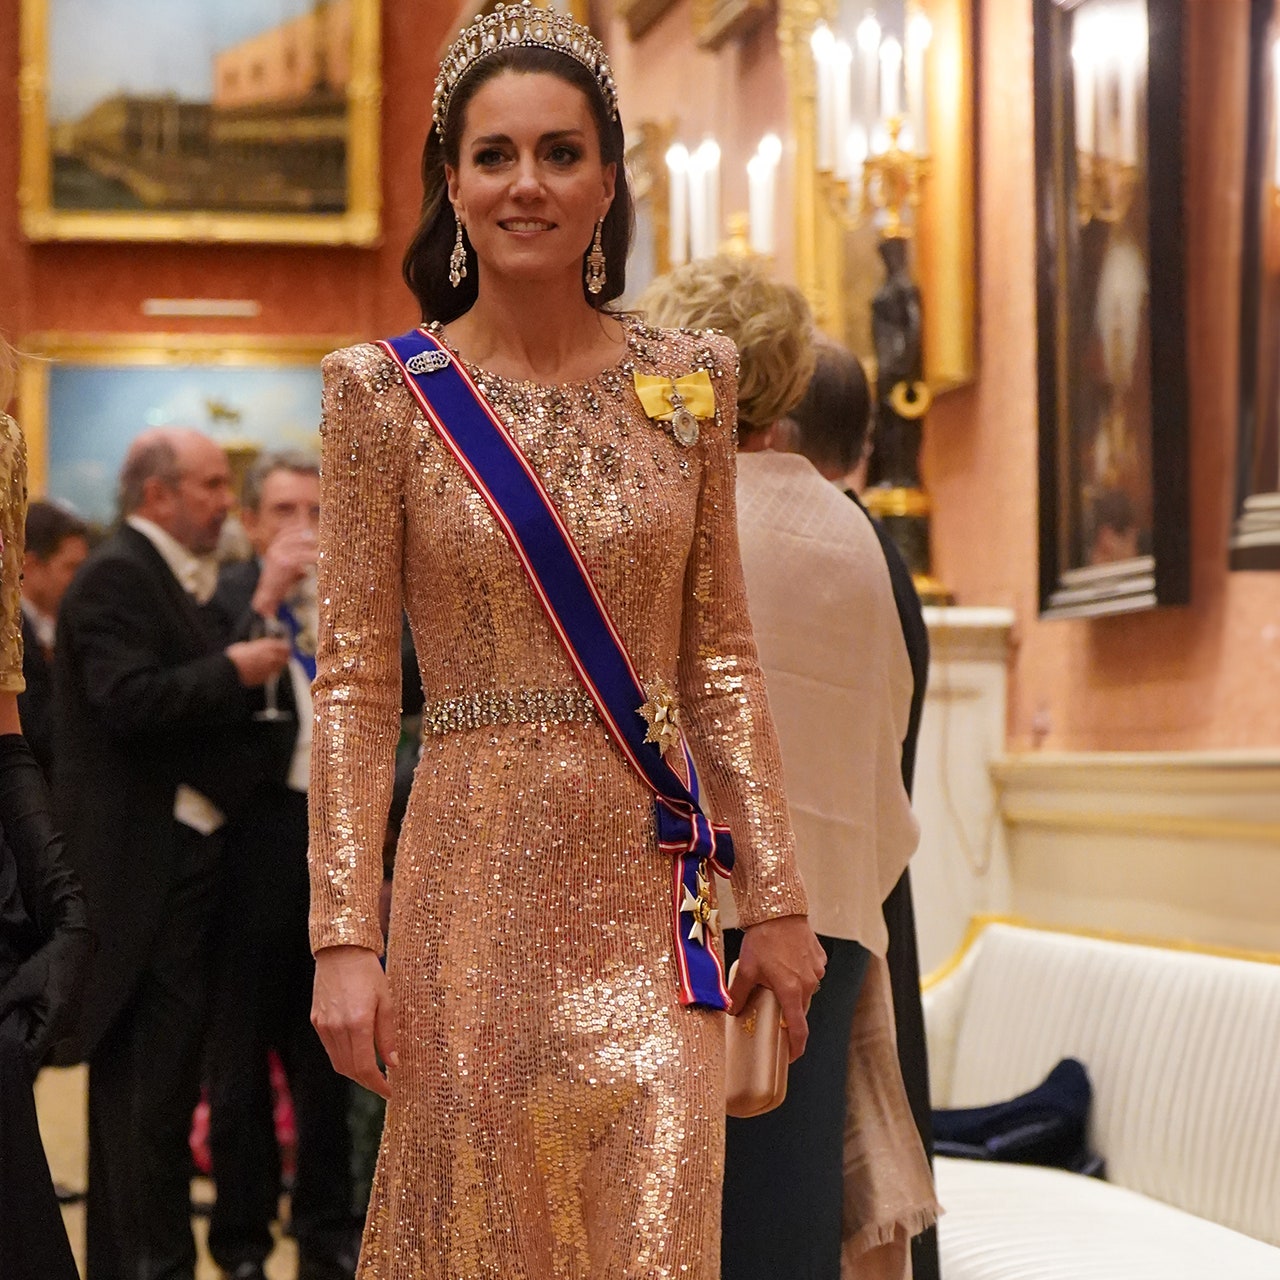 The Princess of Wales emanates queen-like magnitude in a sparkling blush pink gown and a rose gold smokey eye for the annual Diplomatic Reception at Buckingham Palace